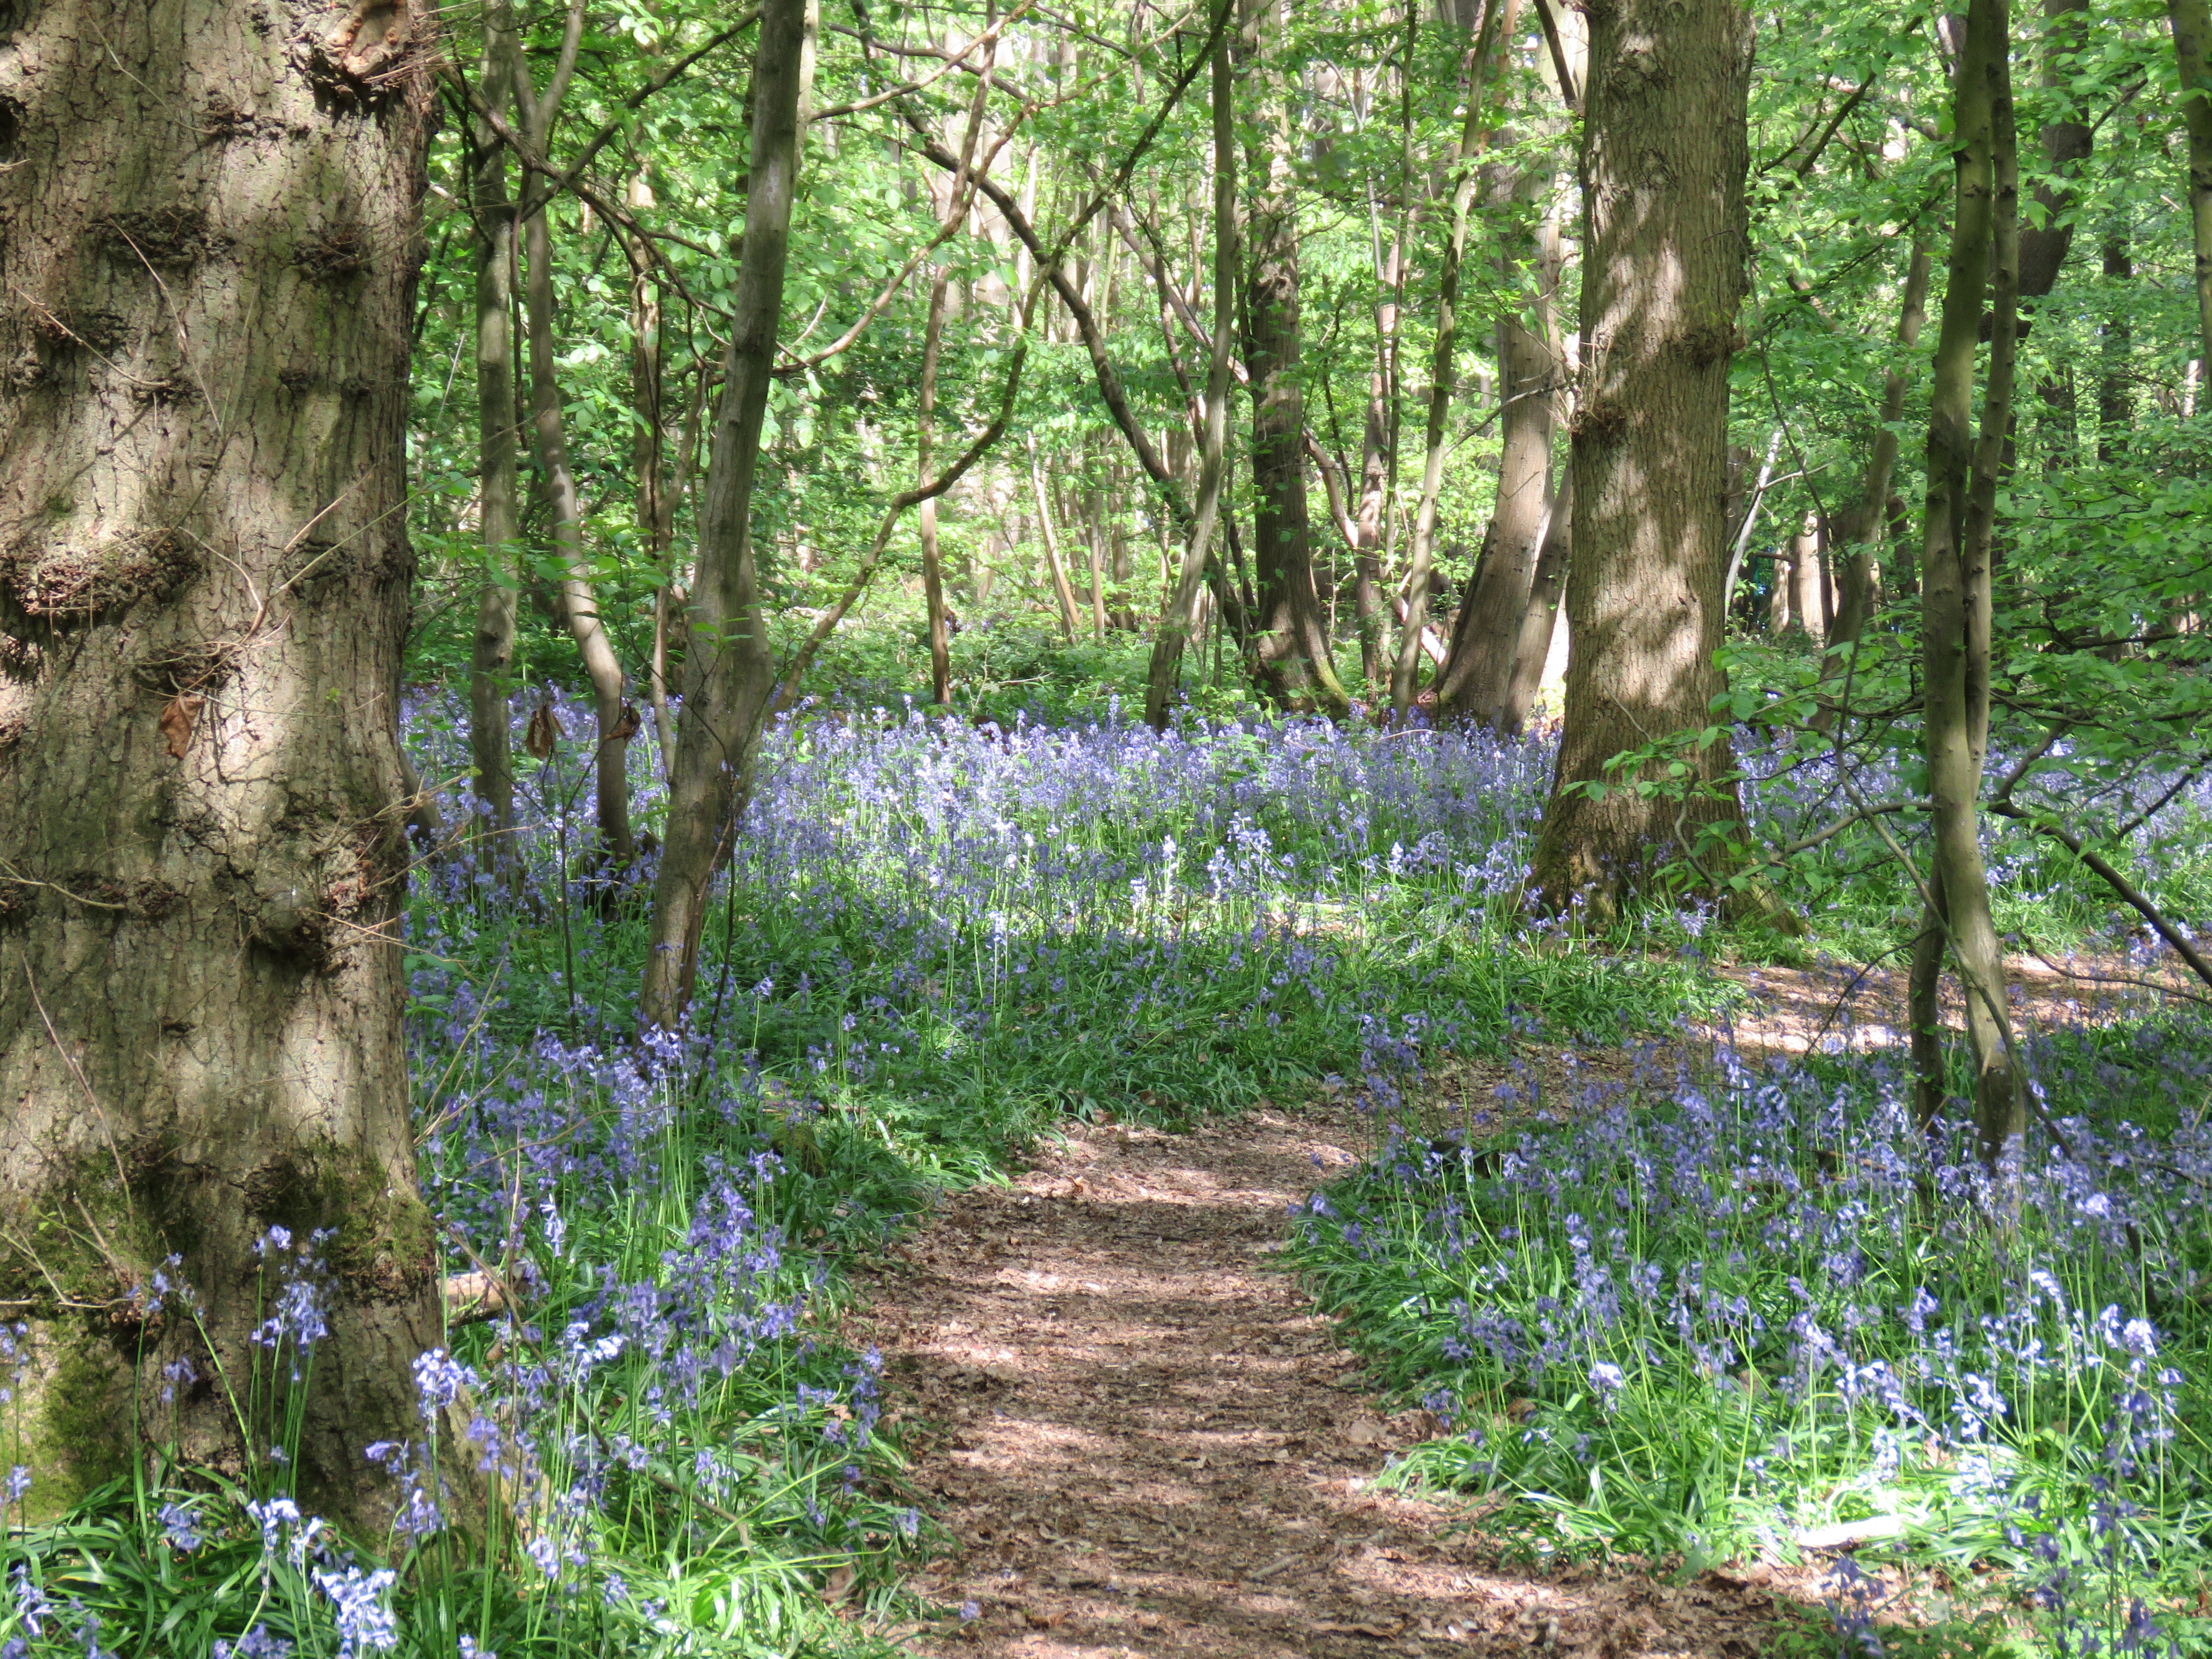 A photograph of bluebells growing in a wood.